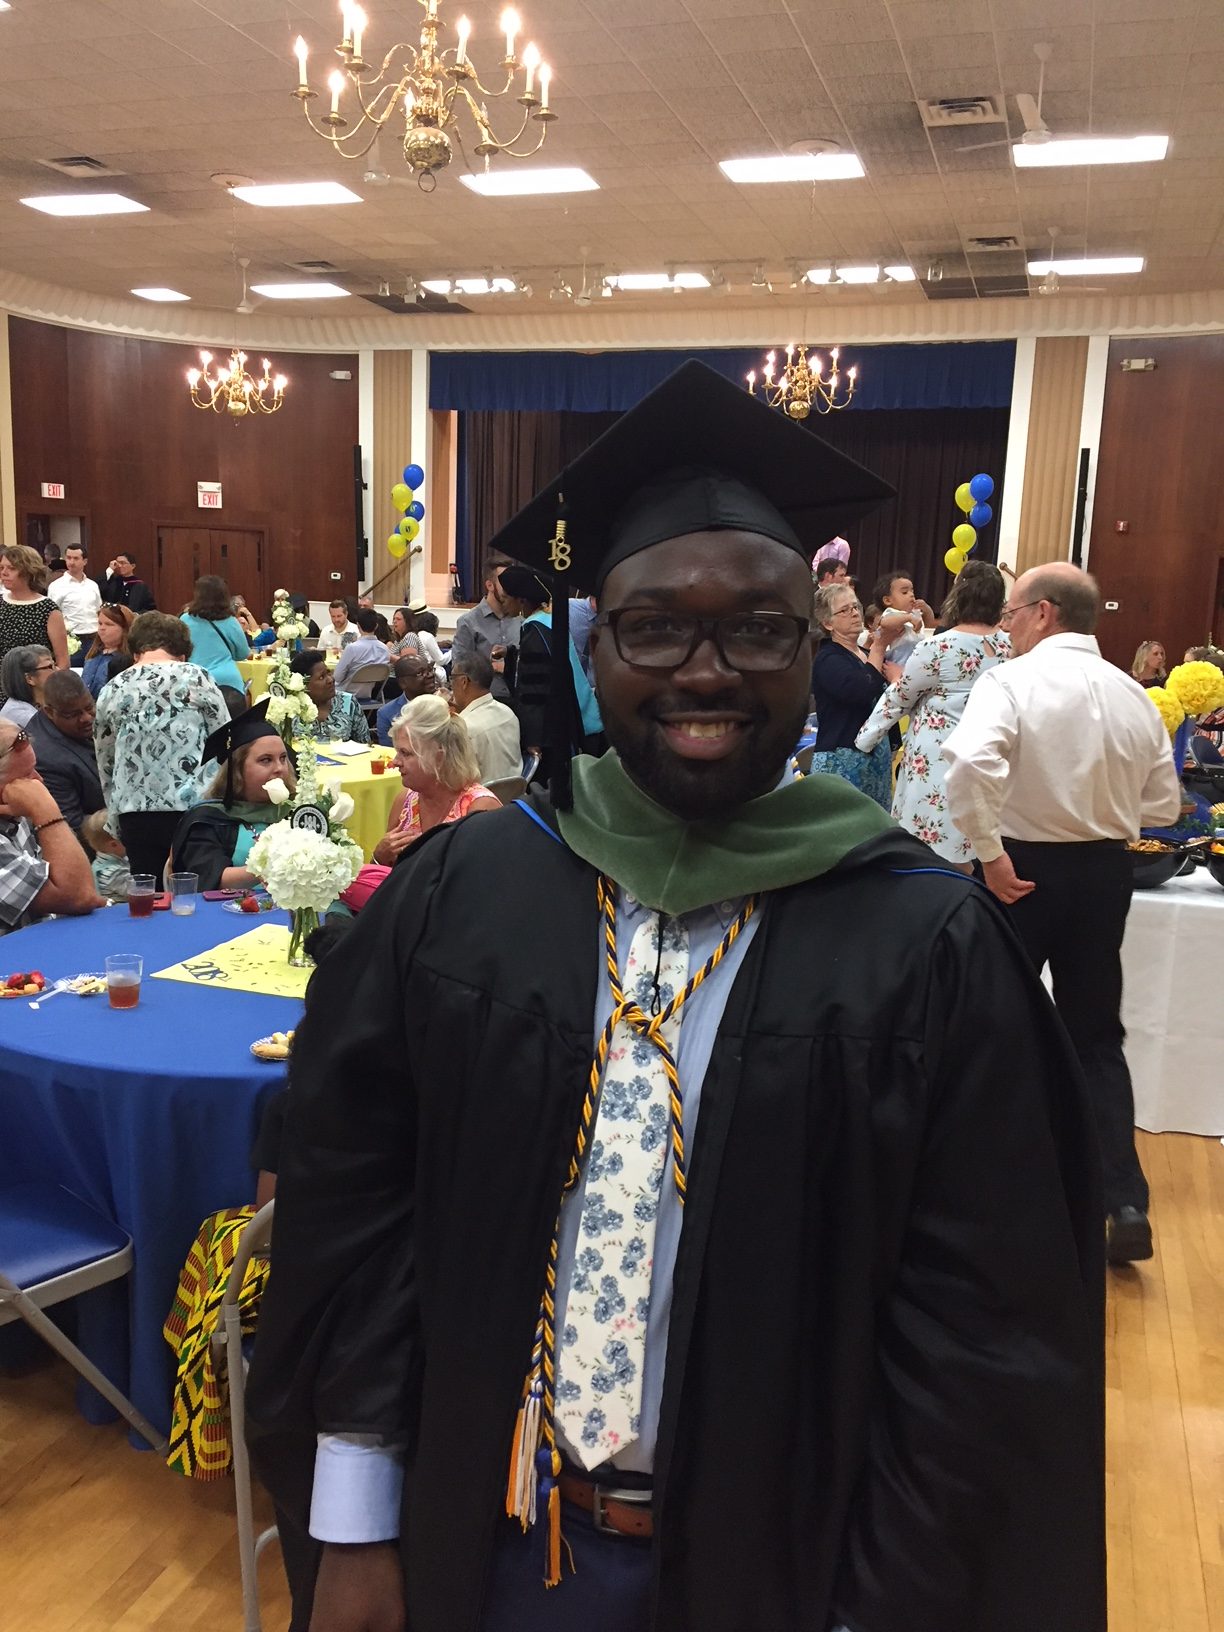 Rico Thomas, wearing black cap and gown at commencement reception